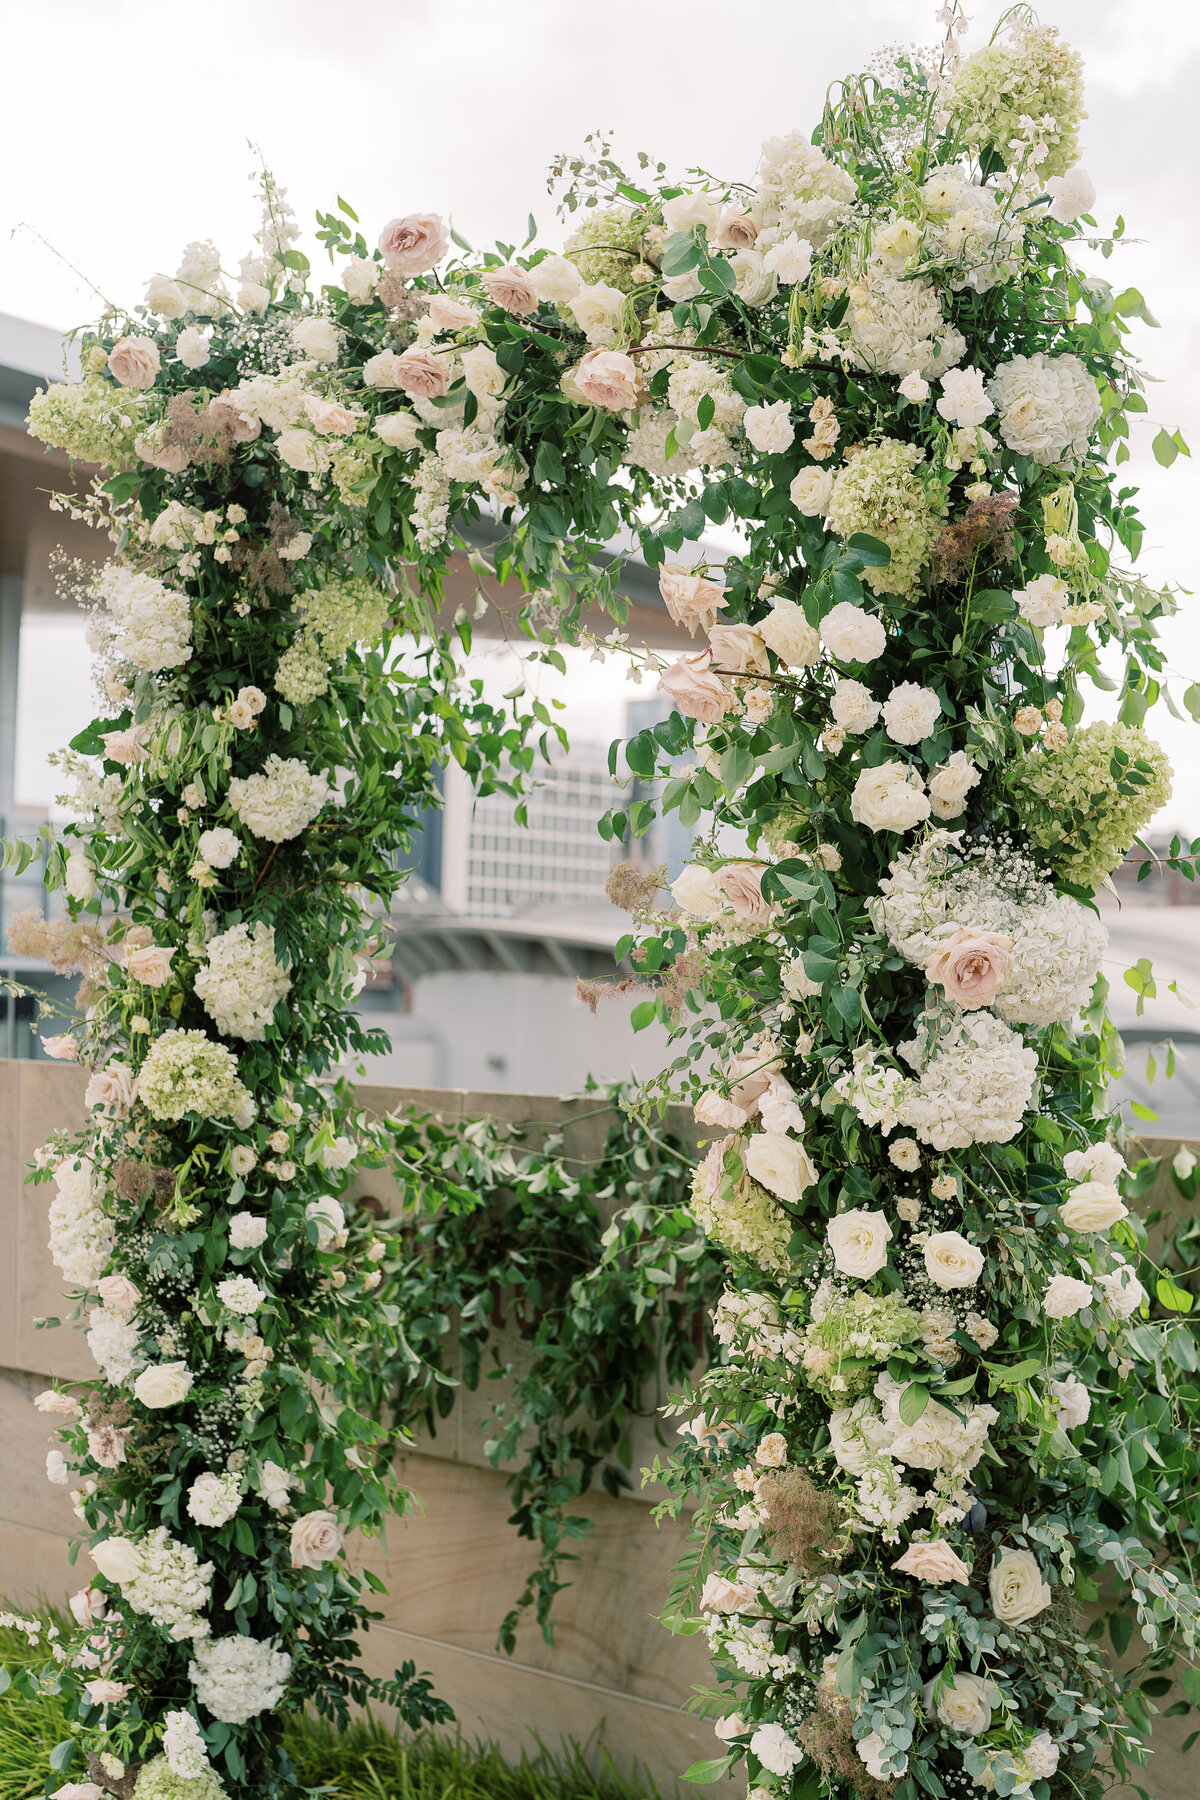 Oversized ceremony floral arch for summer wedding. Classic and timeless floral design in white, cream, taupe, champagne, and green. Lush ceremony florals for garden-inspired summer wedding. Florals composed of roses, hydrangea, baby’s breath, and organic greenery. Design by Rosemary & Finch Floral Design.